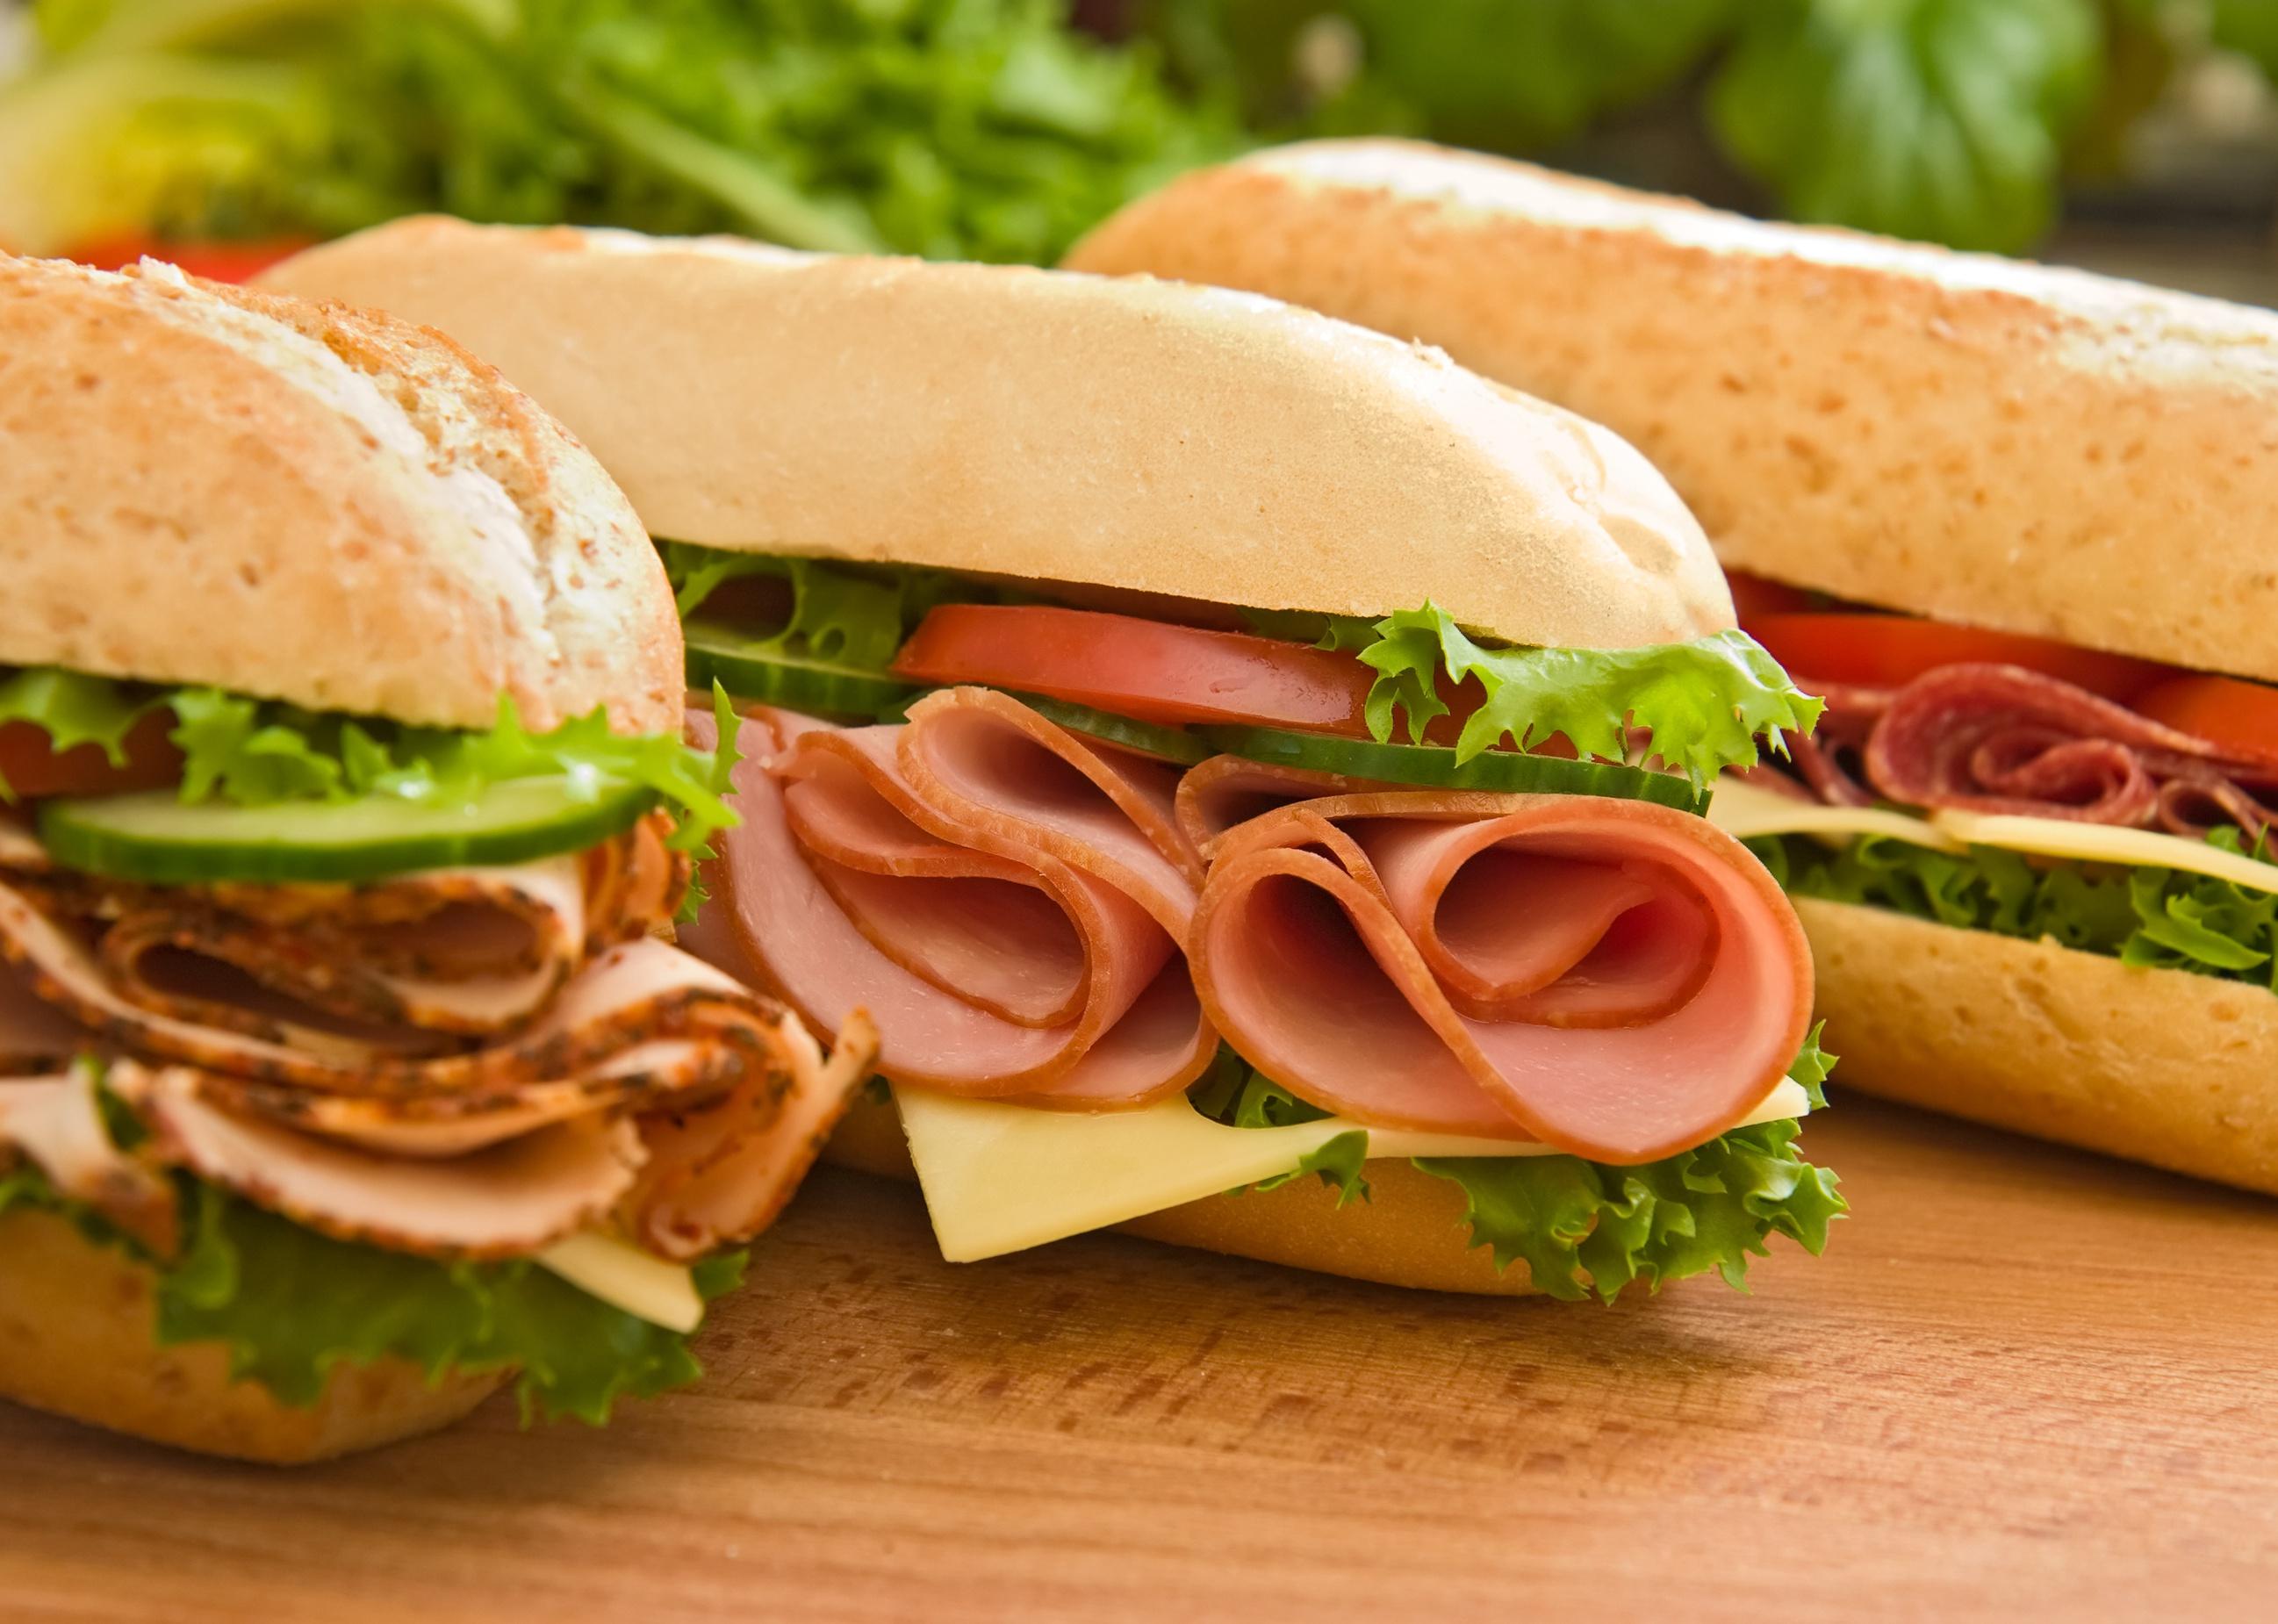 <p>There are many terms for a sandwich made on a long loaf of bread, including "po' boy" and "hero," but the most popular names are "submarine" and "hoagie." Calling these sandwiches "subs" is <a href="https://www.insider.com/words-that-are-different-across-the-us#a-dish-of-cold-cuts-on-long-pieces-of-bread-is-called-a-sub-in-most-parts-of-the-us-except-for-in-parts-of-pennsylvania-where-its-called-a-hoagie-13">most popular nationwide</a>, while "<a href="https://www.britannica.com/topic/hoagie">hoagie</a>" is most commonly used in Pennsylvania. The name is thought to have come from Italian immigrants in Philadelphia working at the Hog Island shipyard during the first World War. They dubbed their sandwiches "hoggies," which later evolved into hoagies.</p>